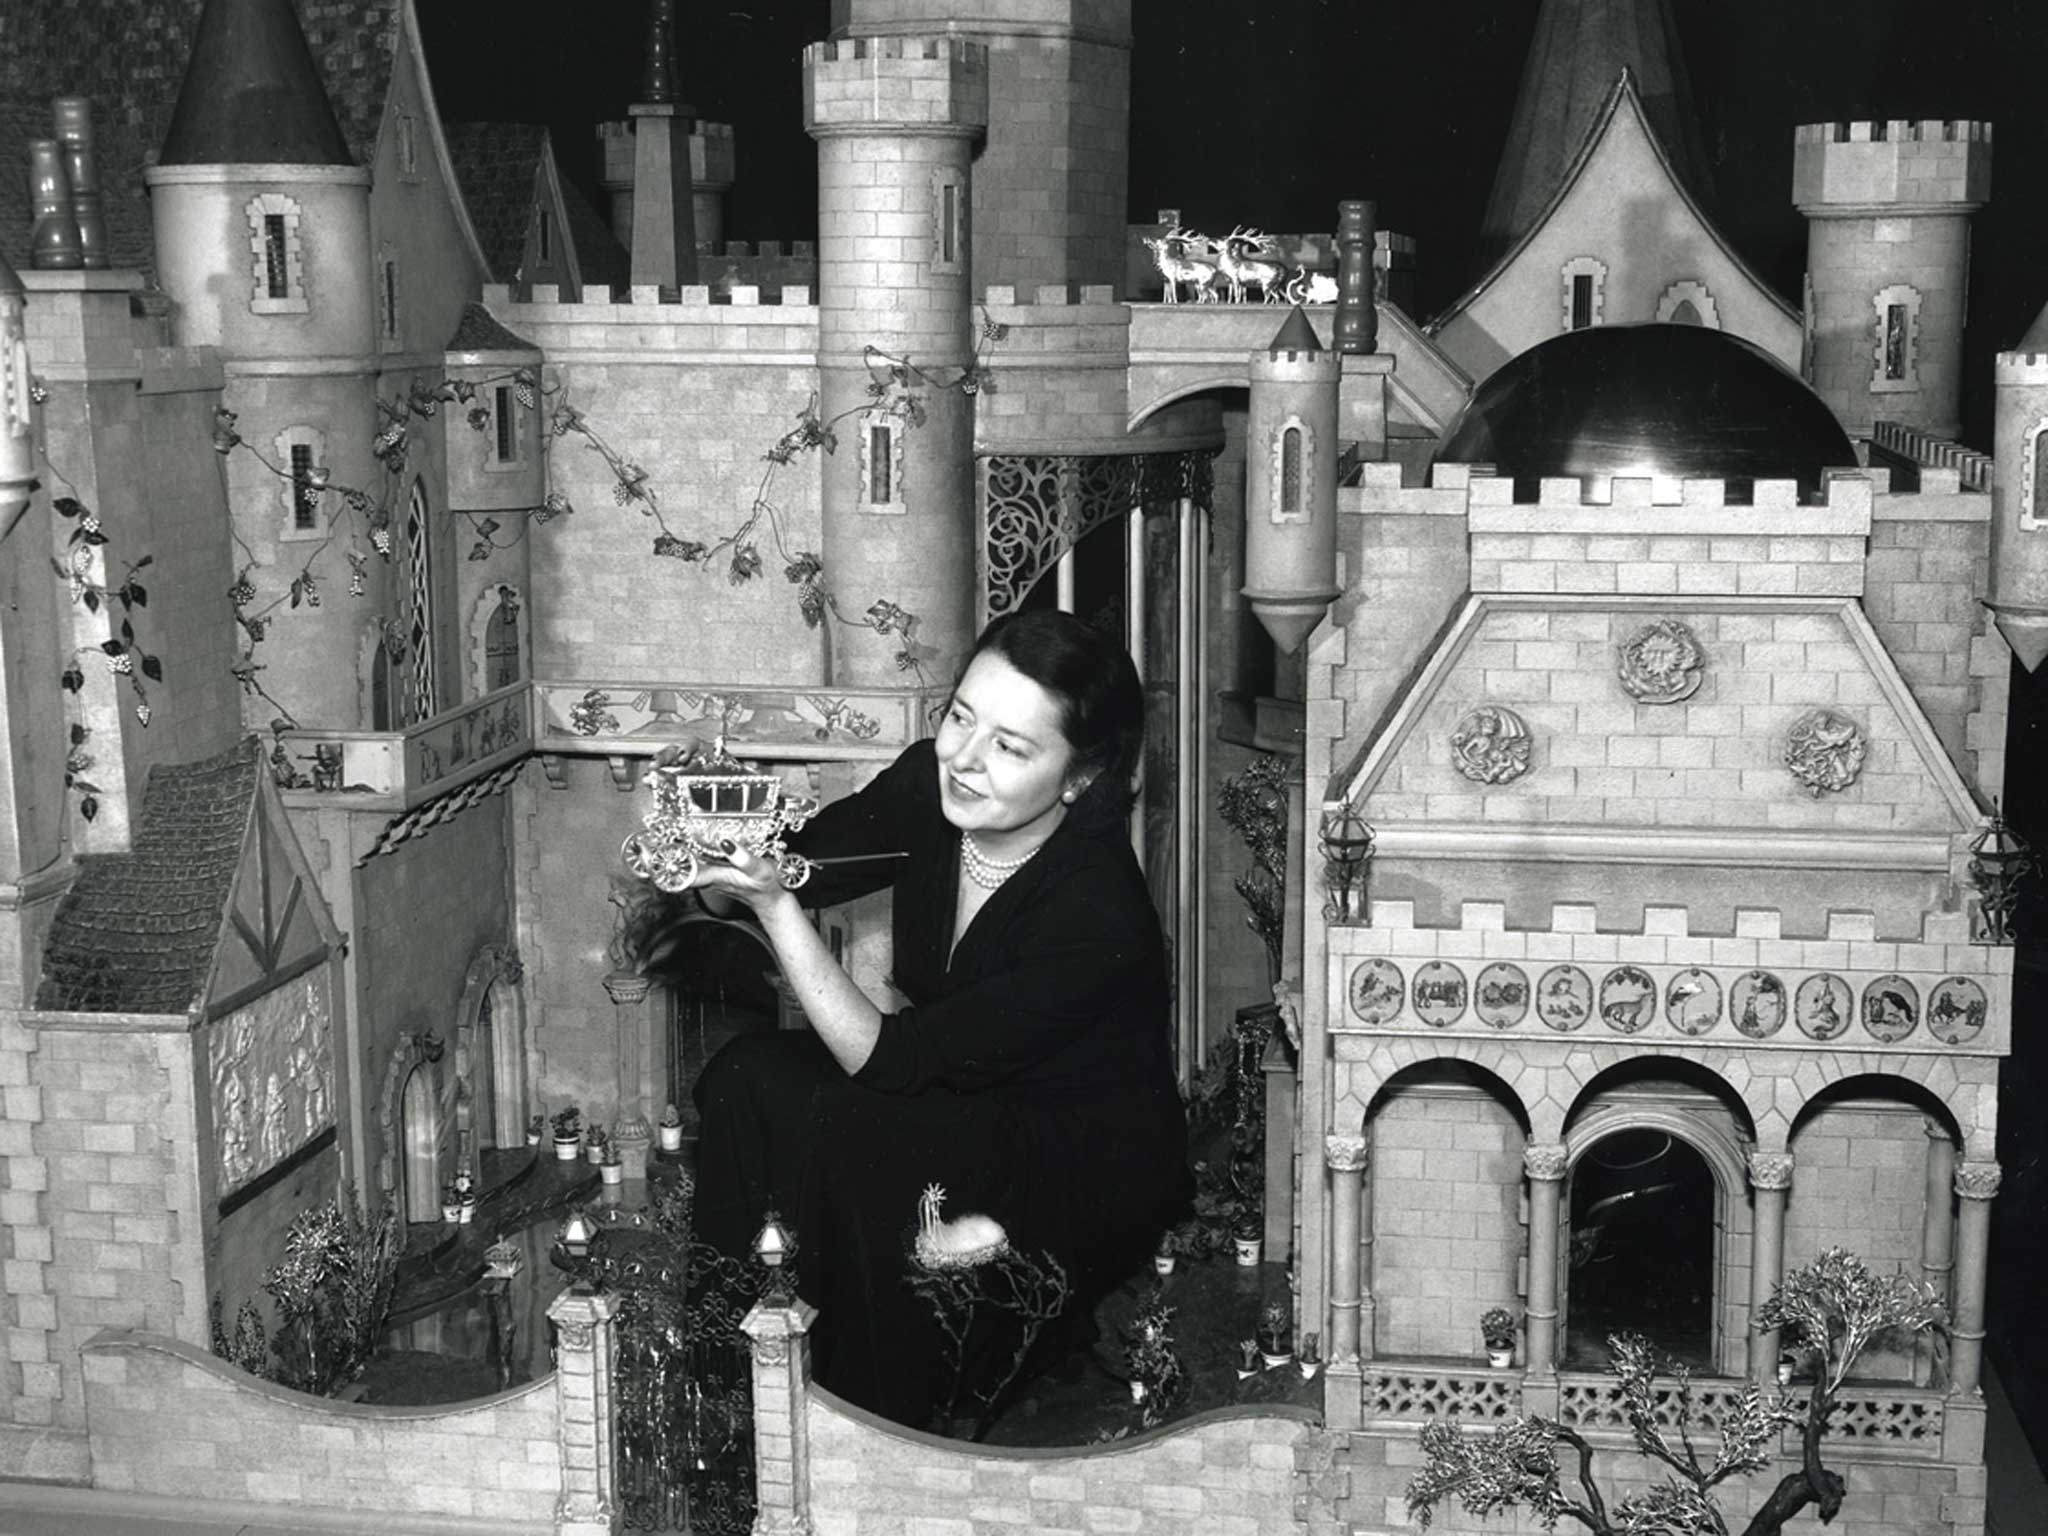 Silent film star Colleen Moore was always fascinated with dolls